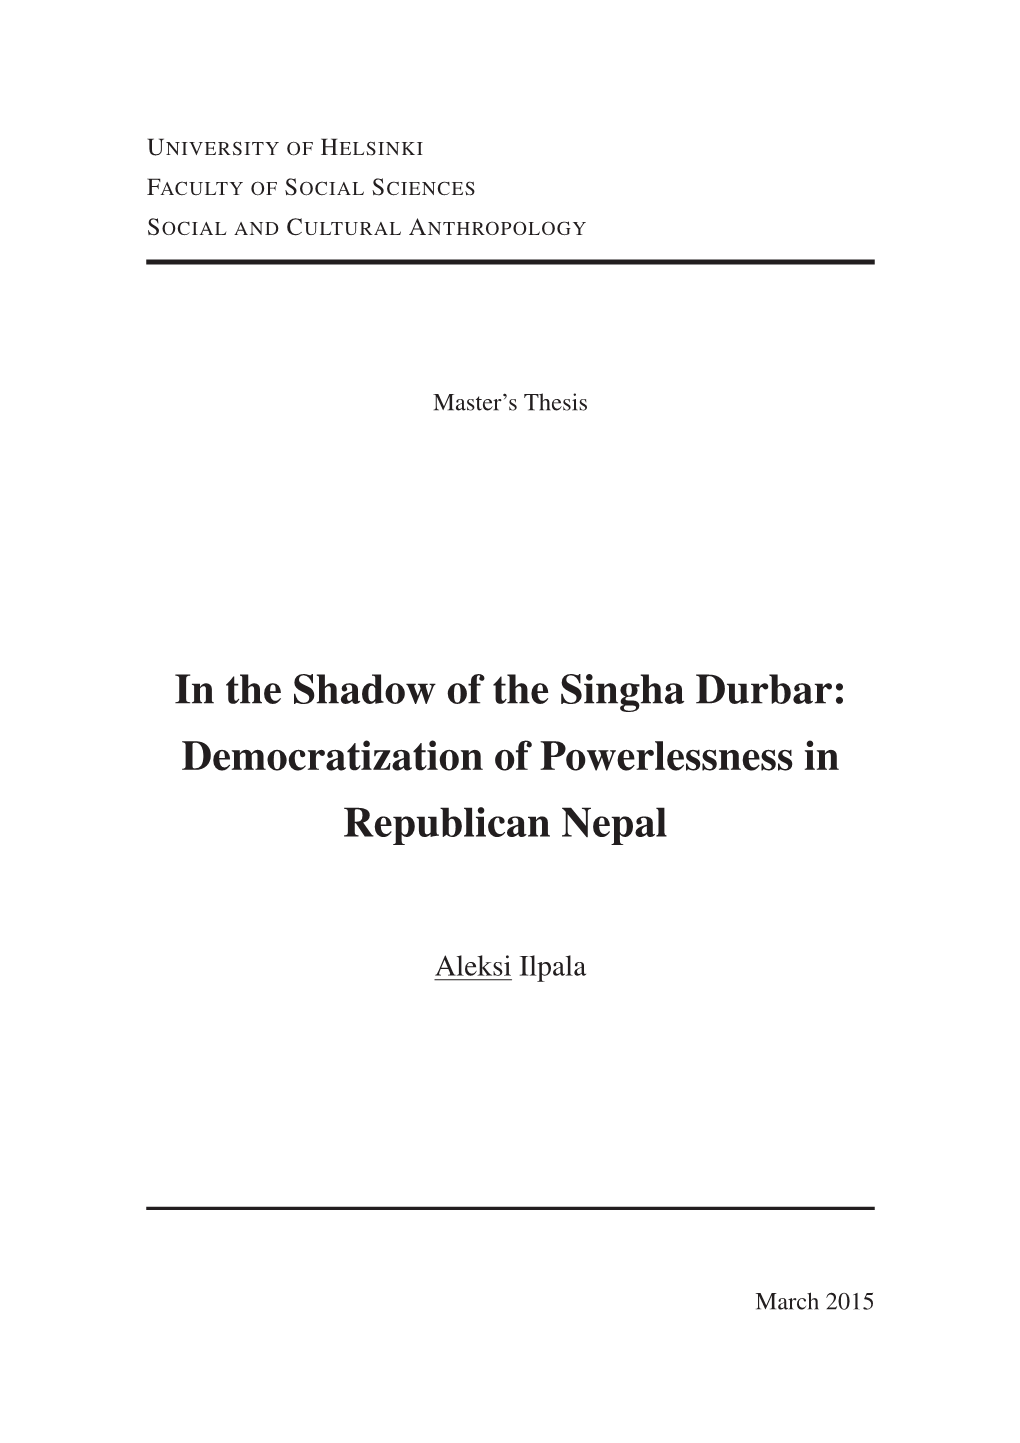 In the Shadow of the Singha Durbar: Democratization of Powerlessness in Republican Nepal